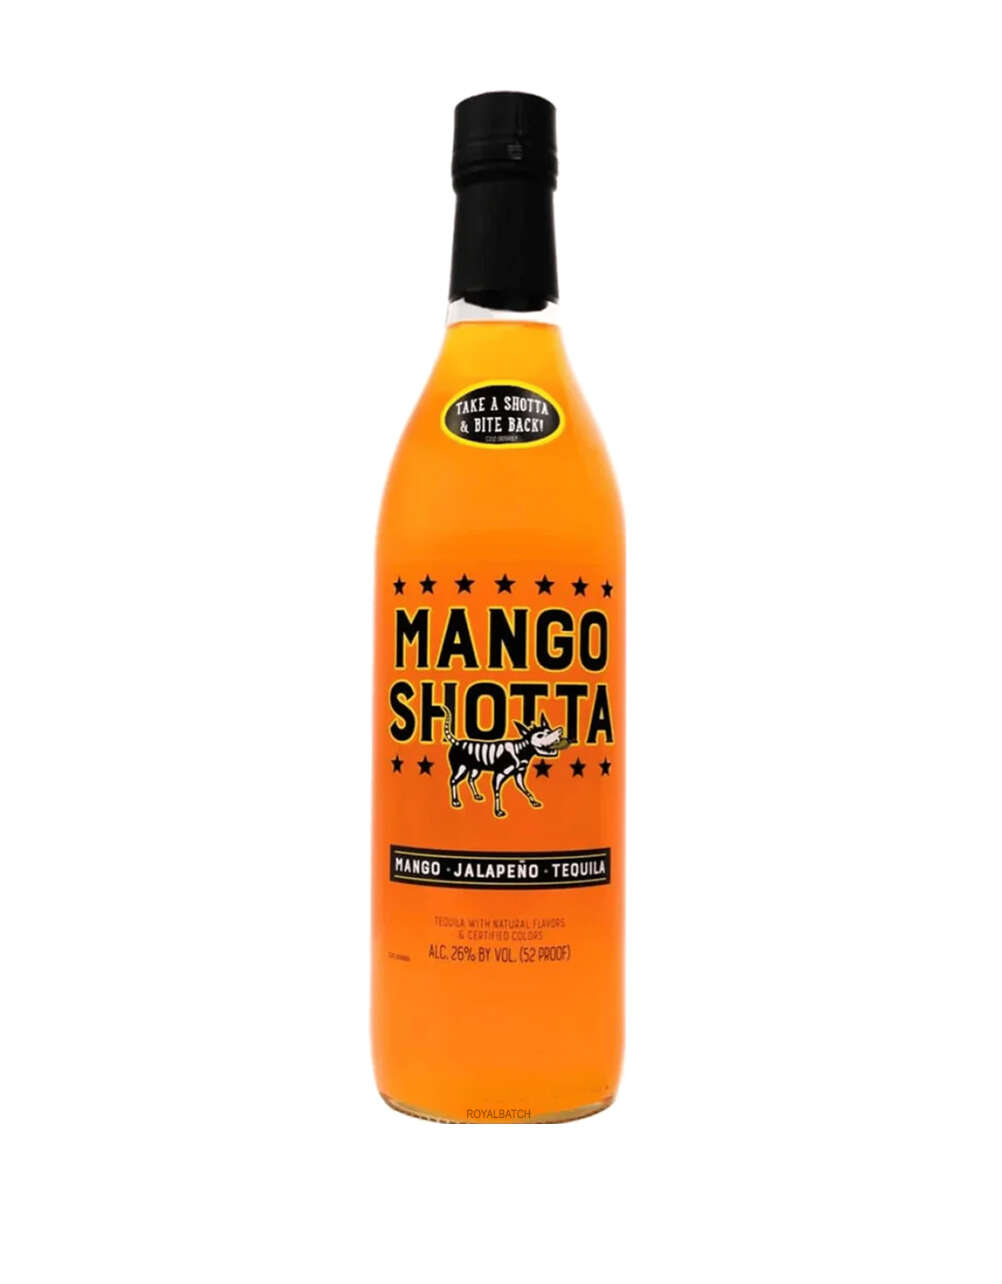 Mango Shotta Spicy Mango and Jalapeno Flavored Tequila 10 Pack of 50ml